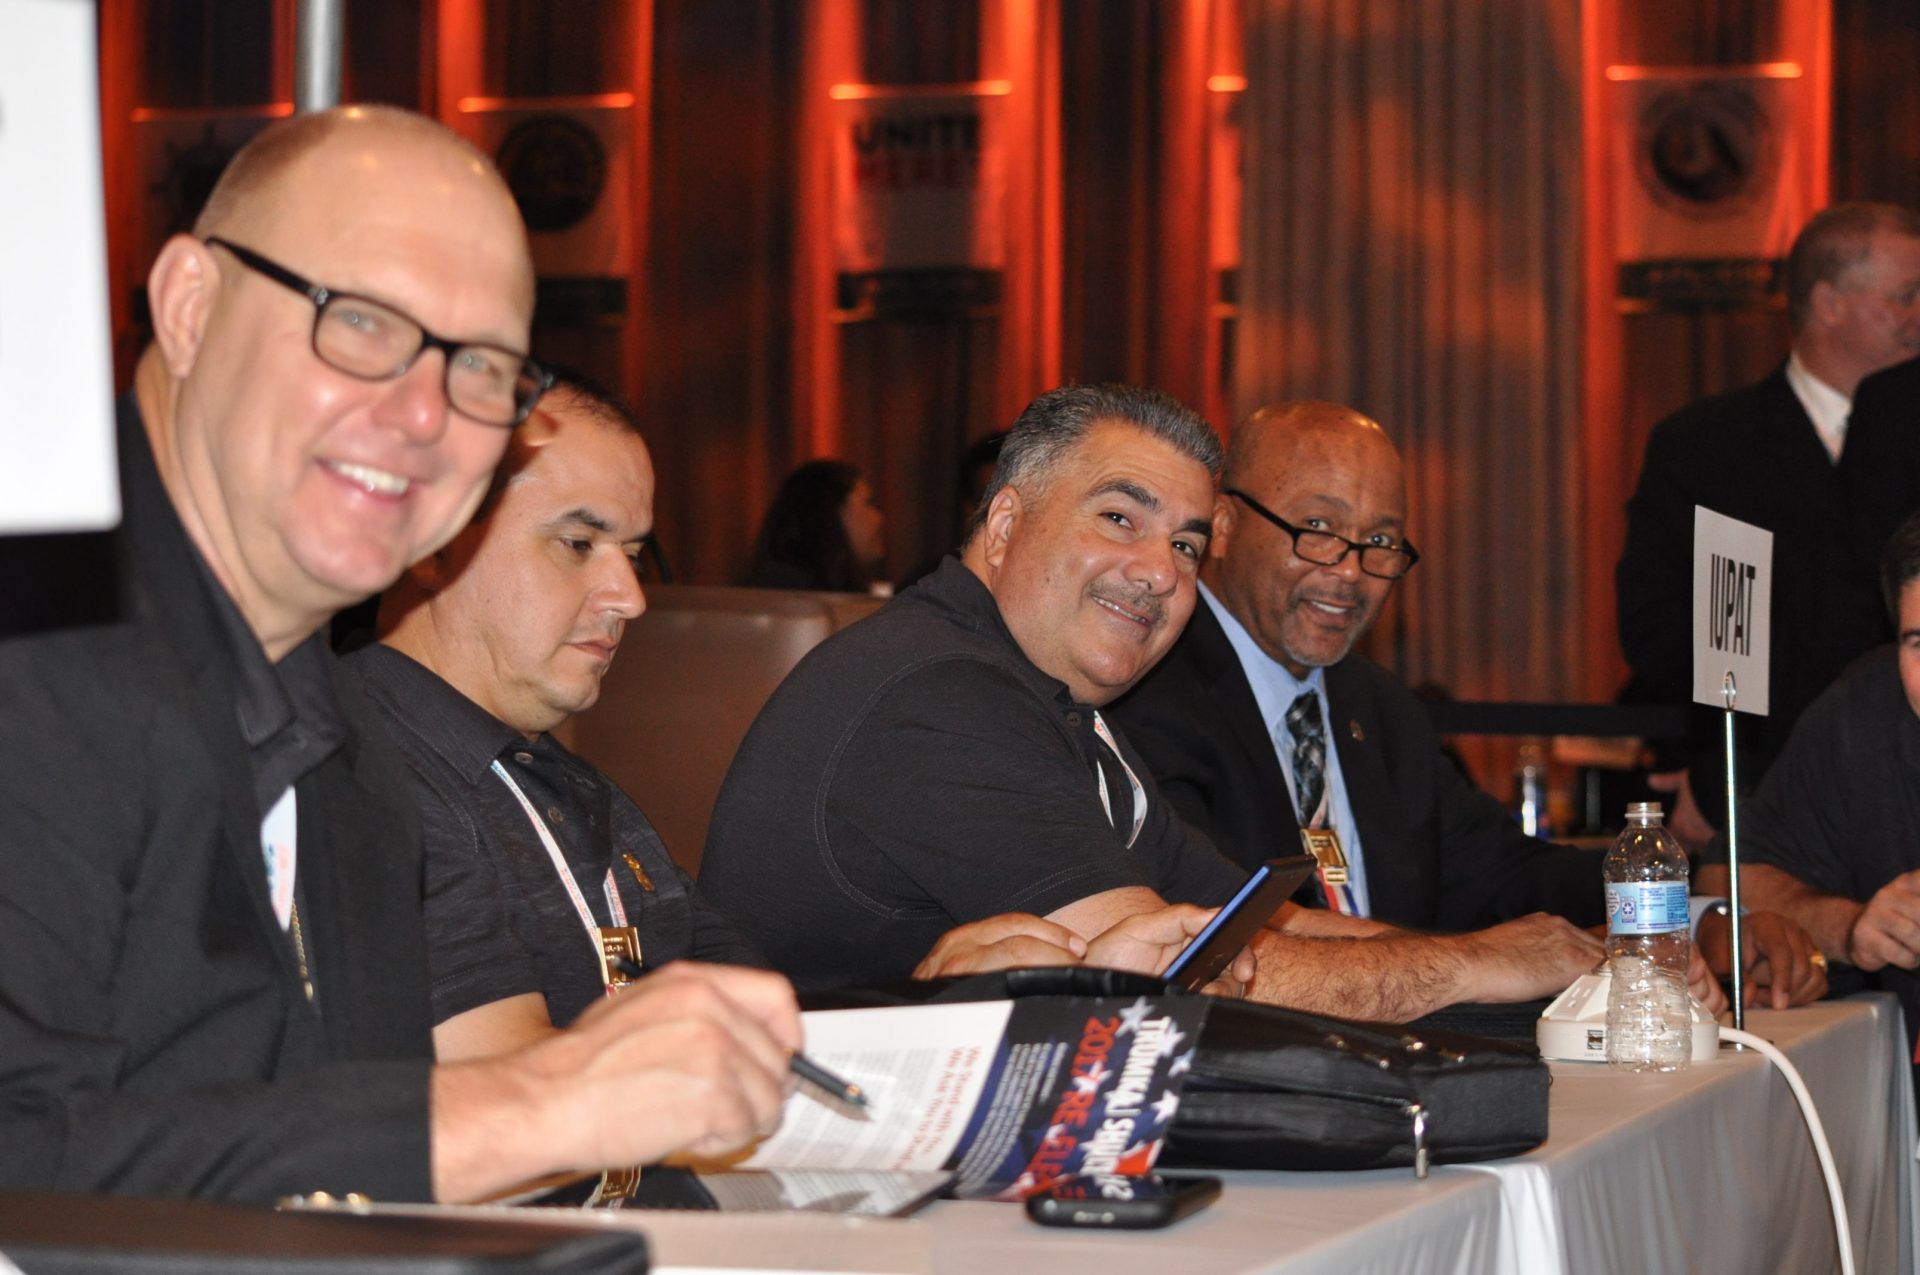 Image from the Gallery: AFL-CIO Convention – St. Louis, MO